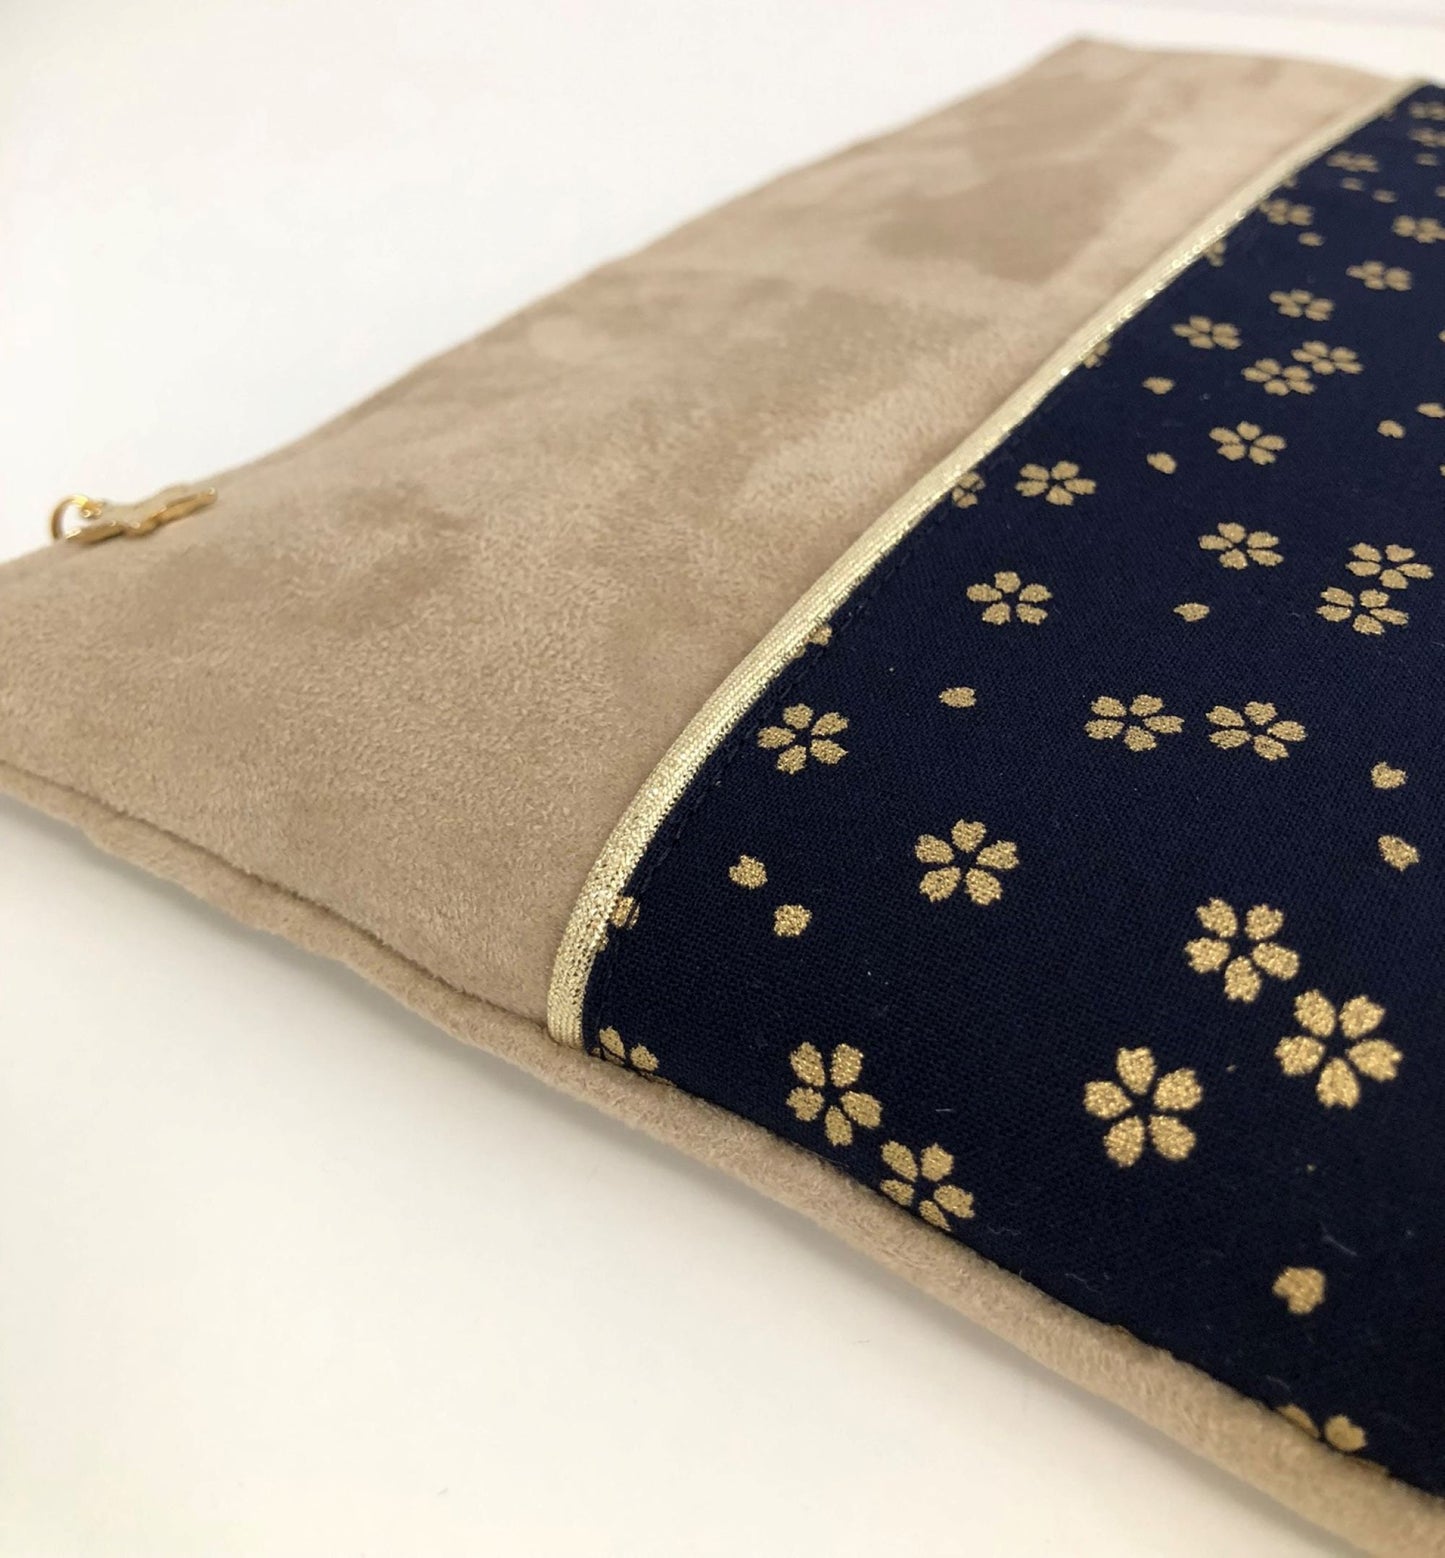 Beige and midnight blue laptop bag with golden flowers with charger pocket